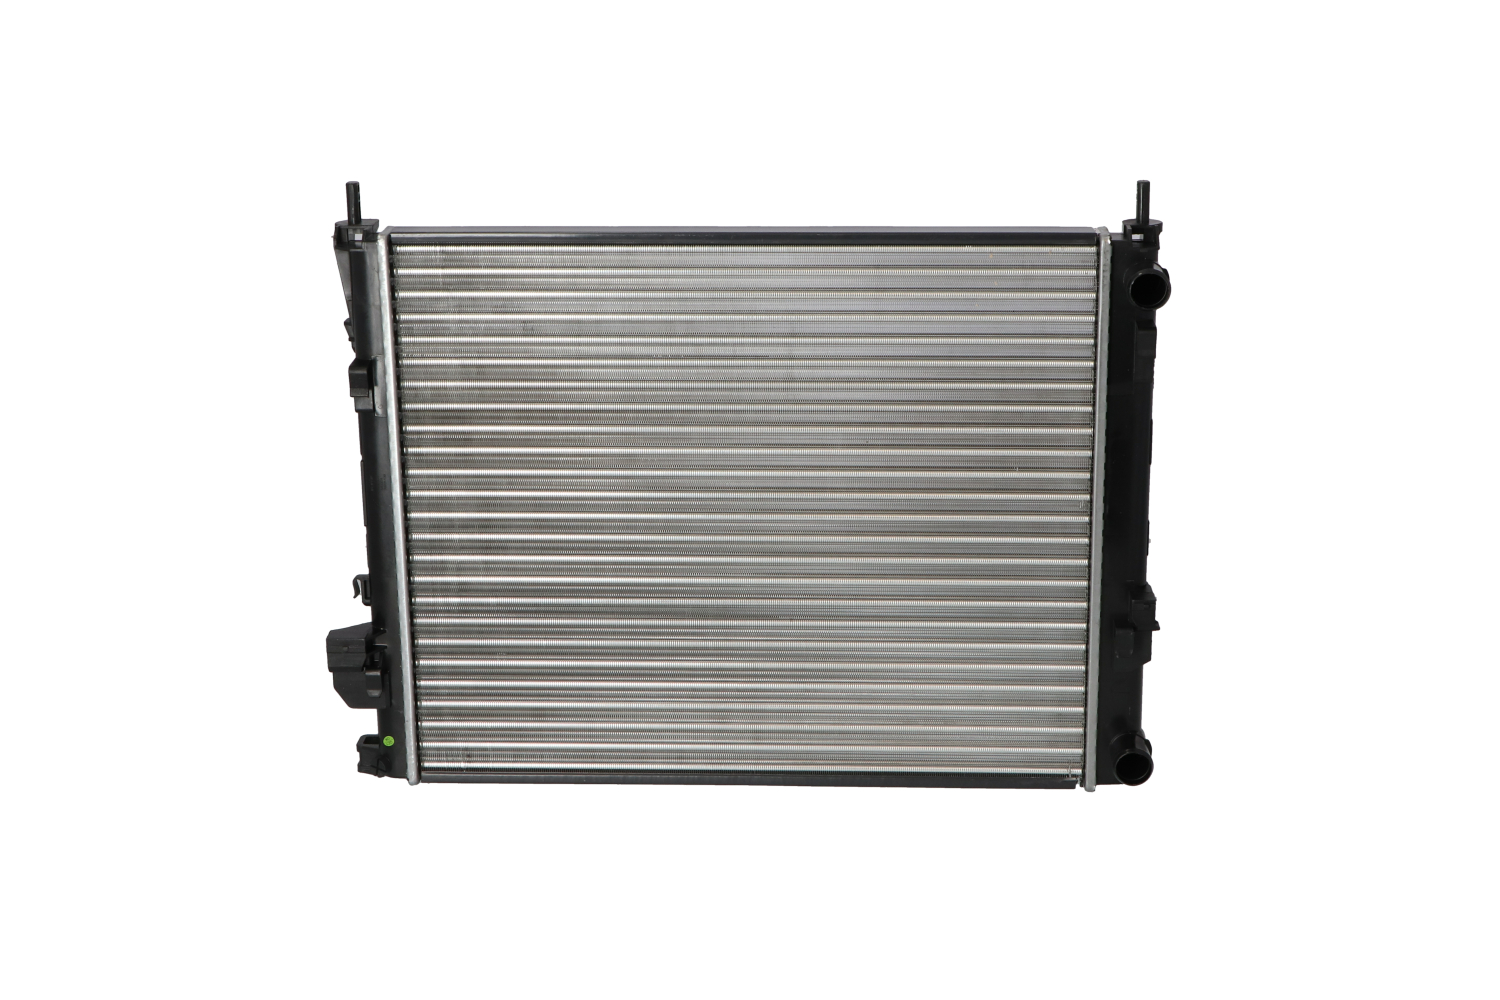 NRF 58332A Engine radiator Aluminium, 562 x 470 x 23 mm, Mechanically jointed cooling fins